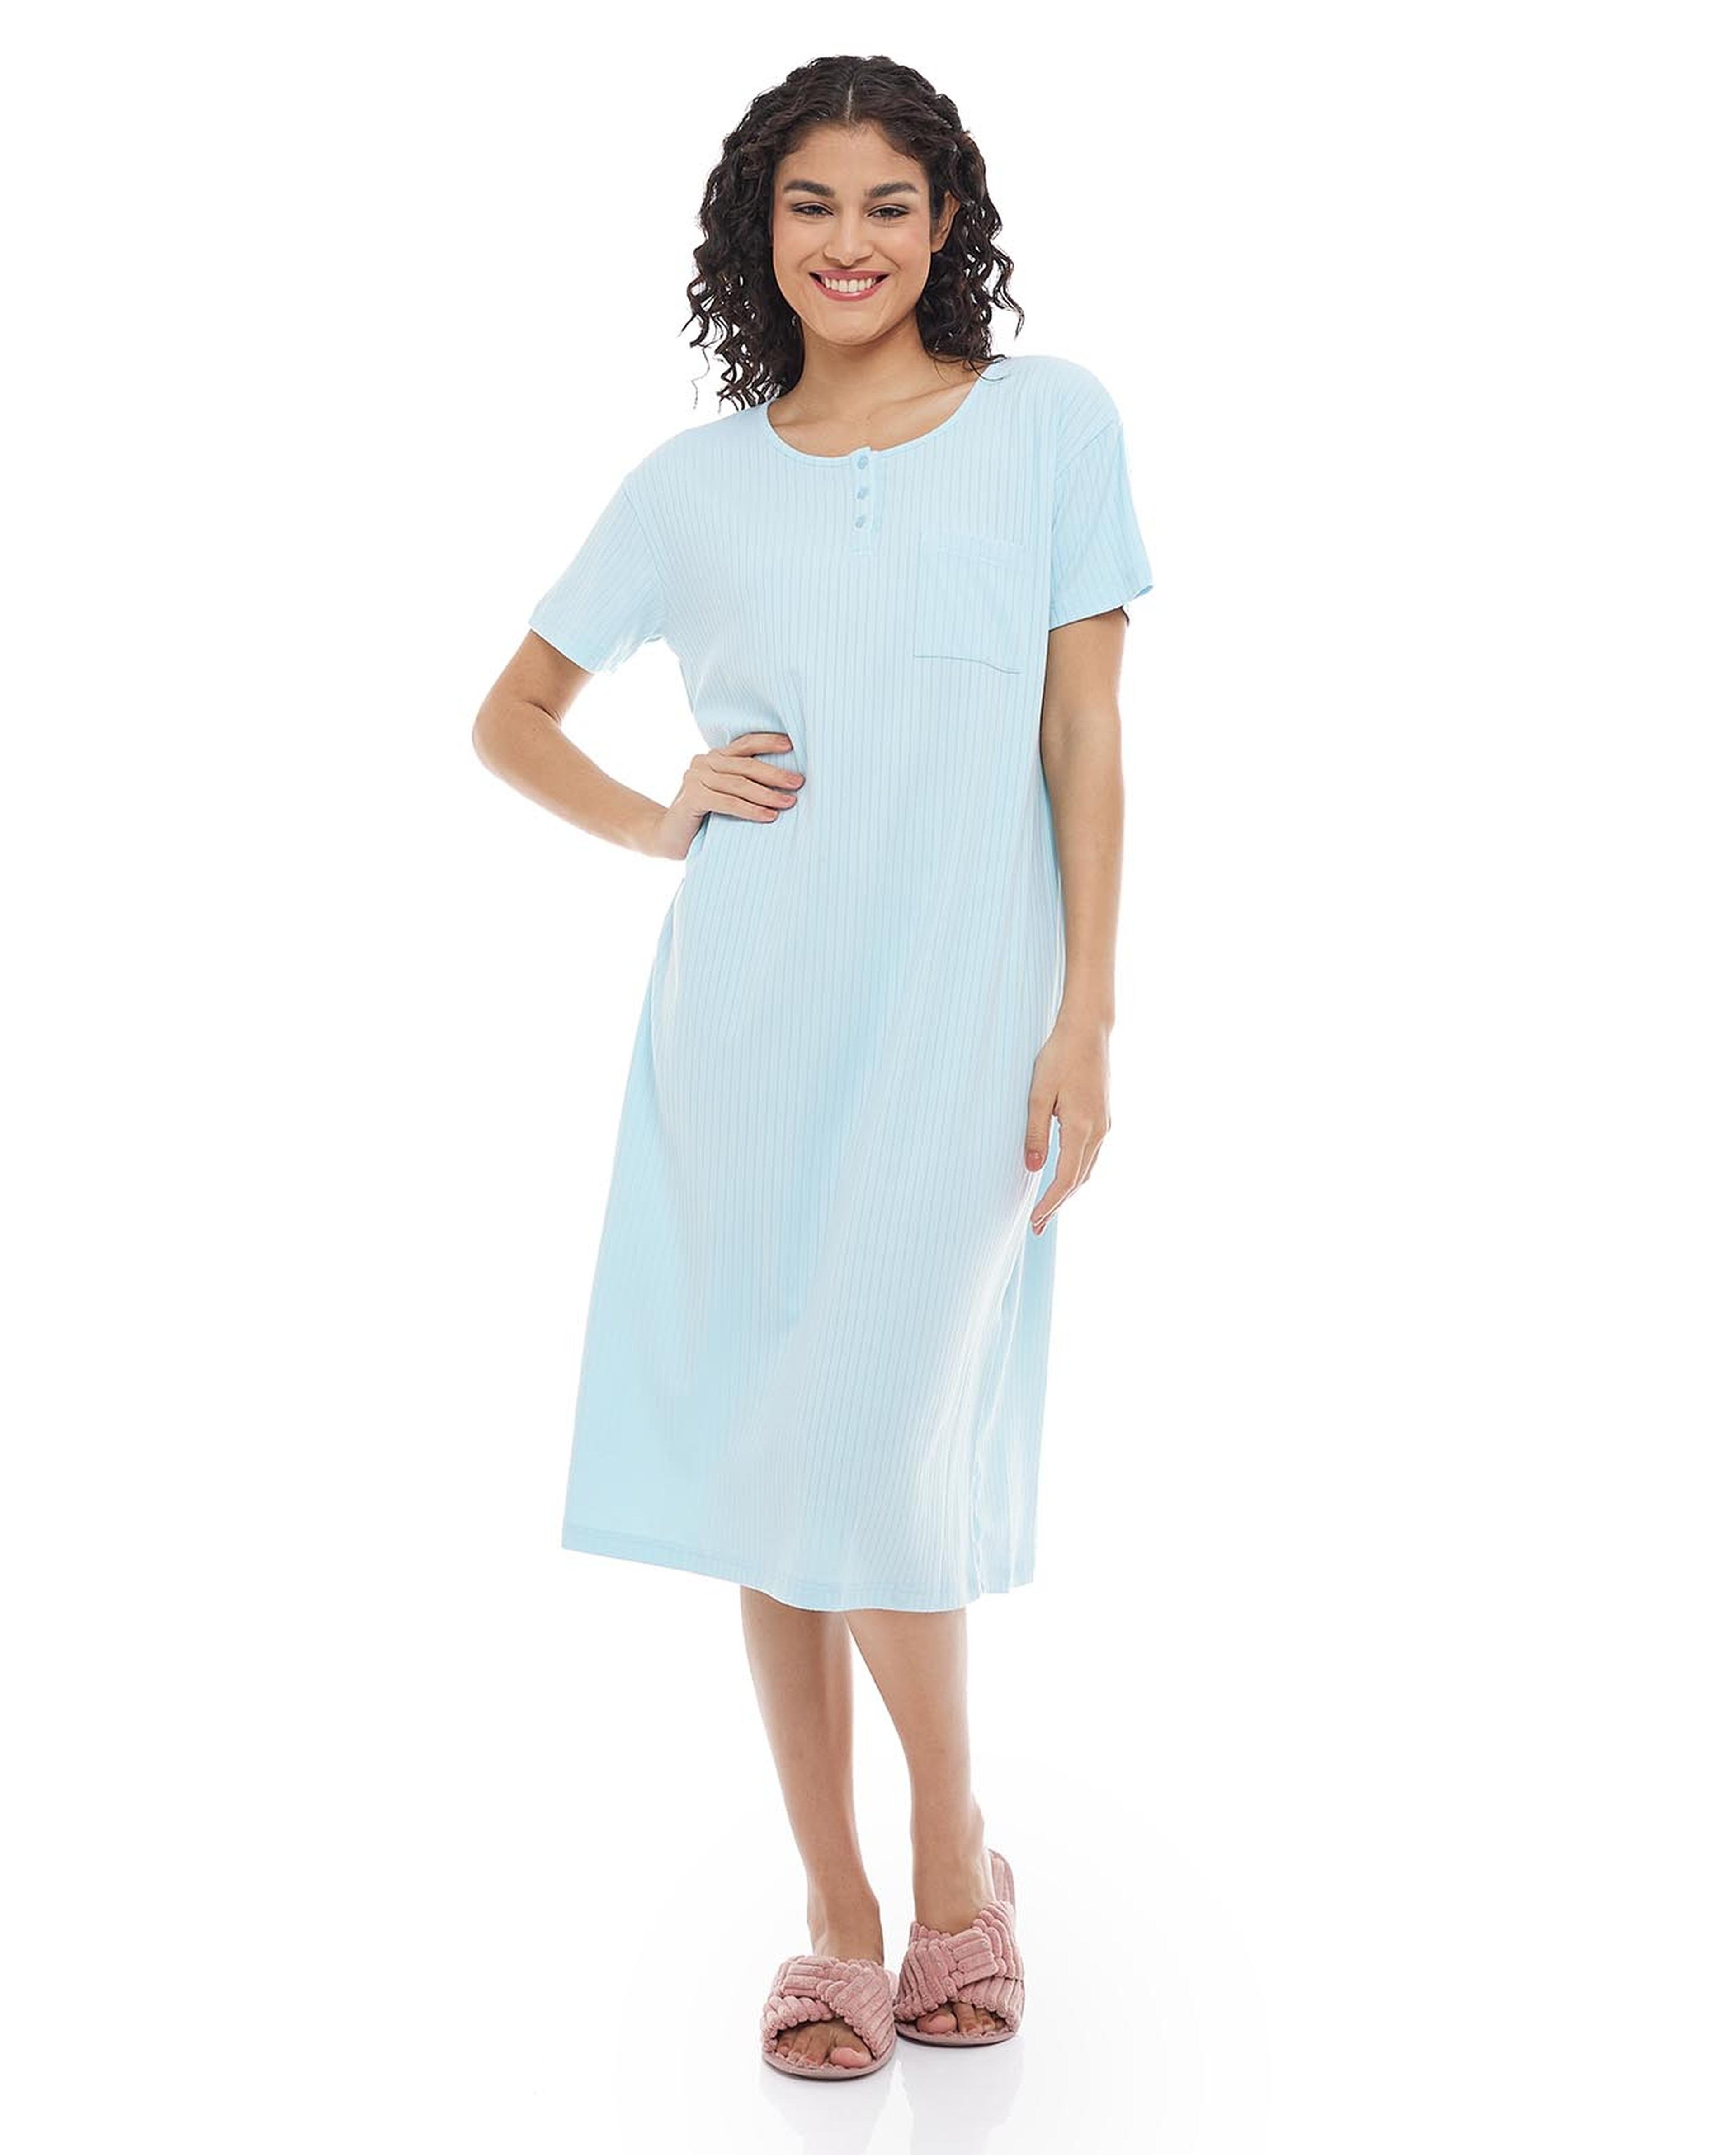 Ribbed Nightdress with Crew Neck and Short Sleeves